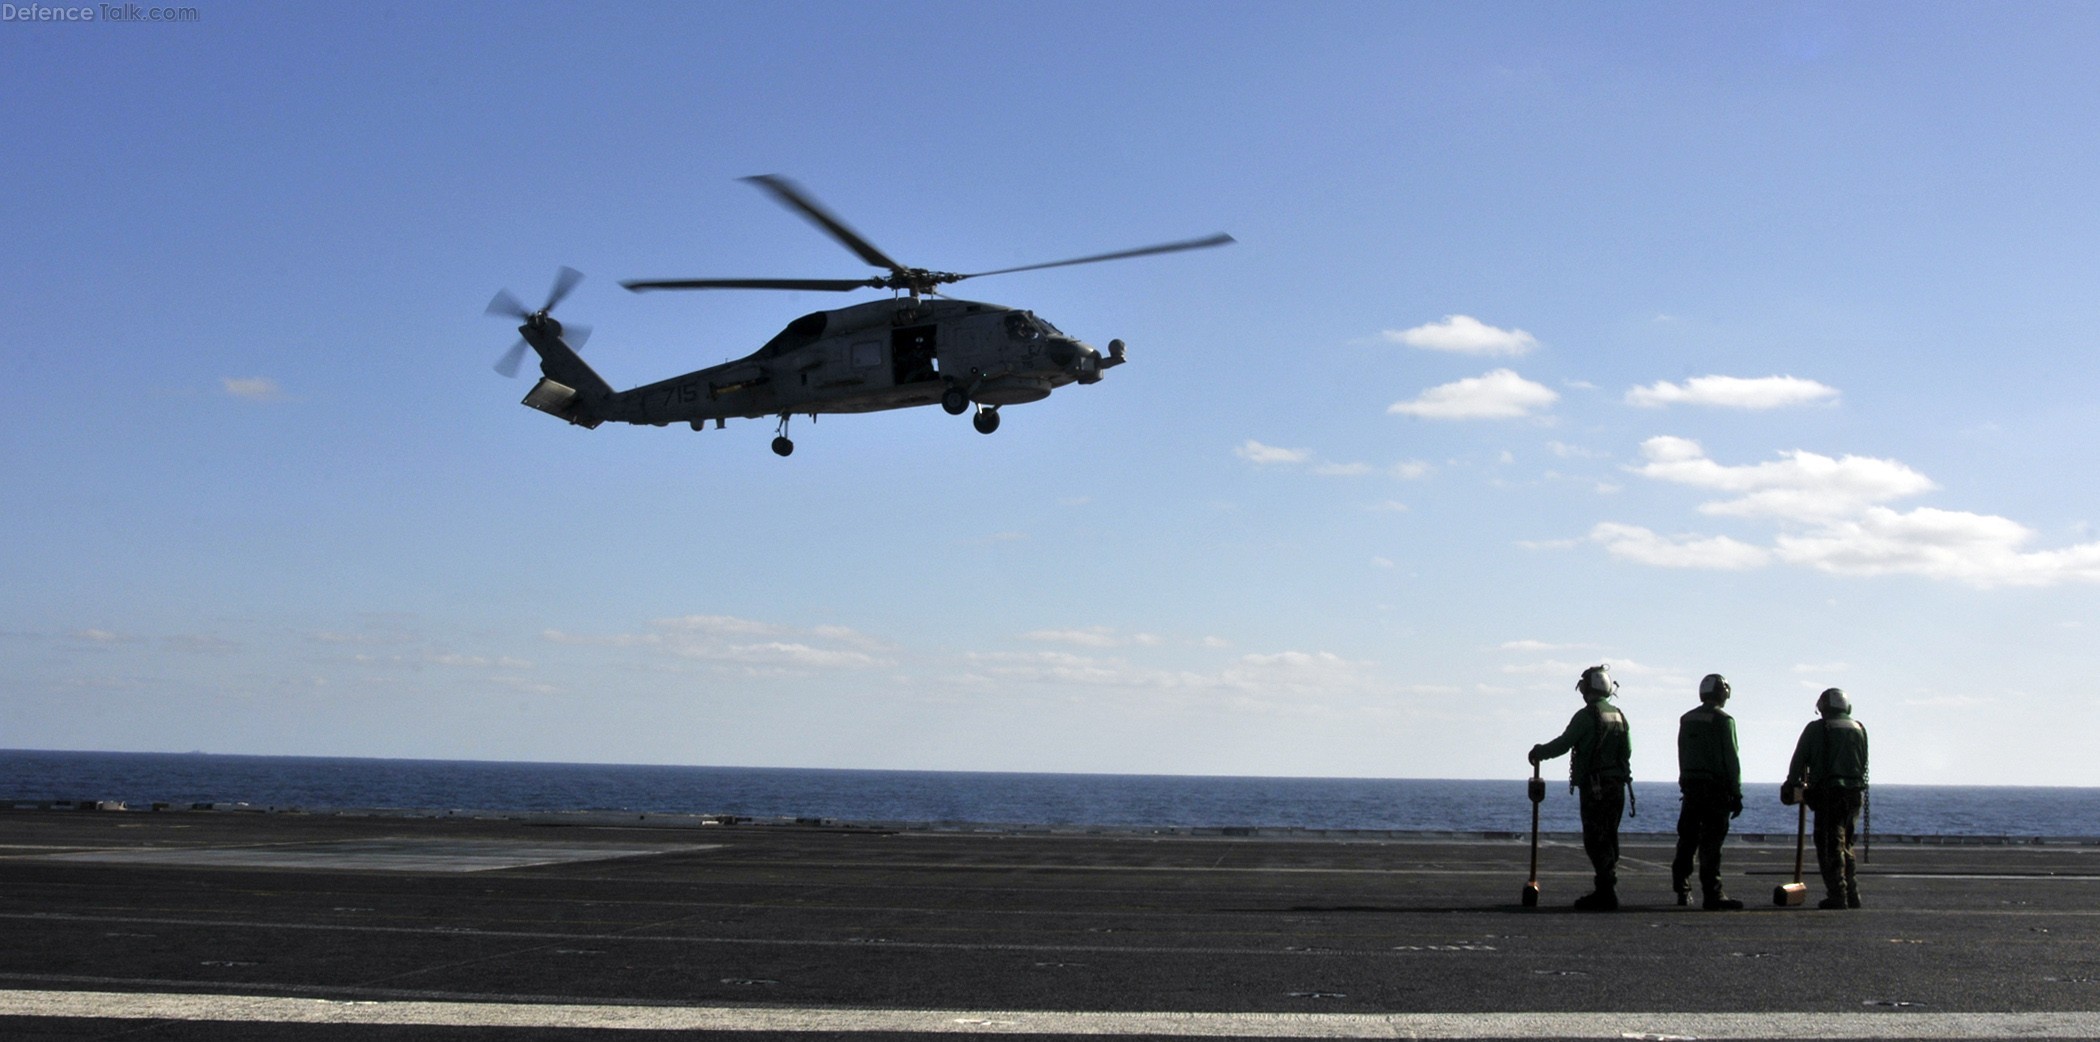 SH-60B Seahawk Helicopter landing on aircraft carrier